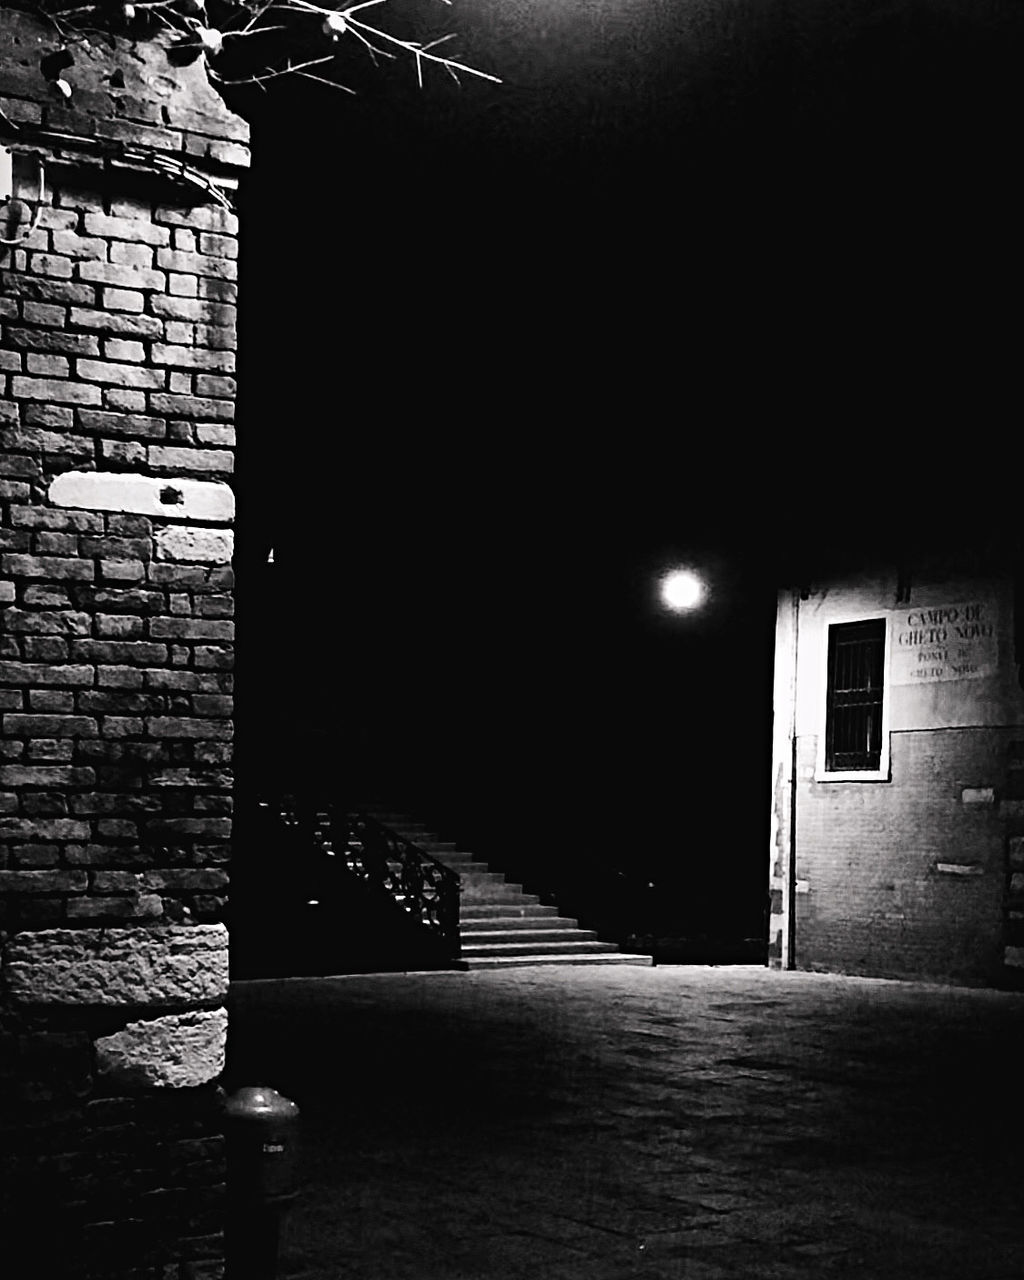 darkness, black, architecture, light, black and white, built structure, monochrome, night, white, monochrome photography, no people, building exterior, building, illuminated, wall - building feature, lighting equipment, wall, brick wall, brick, entrance, lighting, door, street light, street, outdoors, city